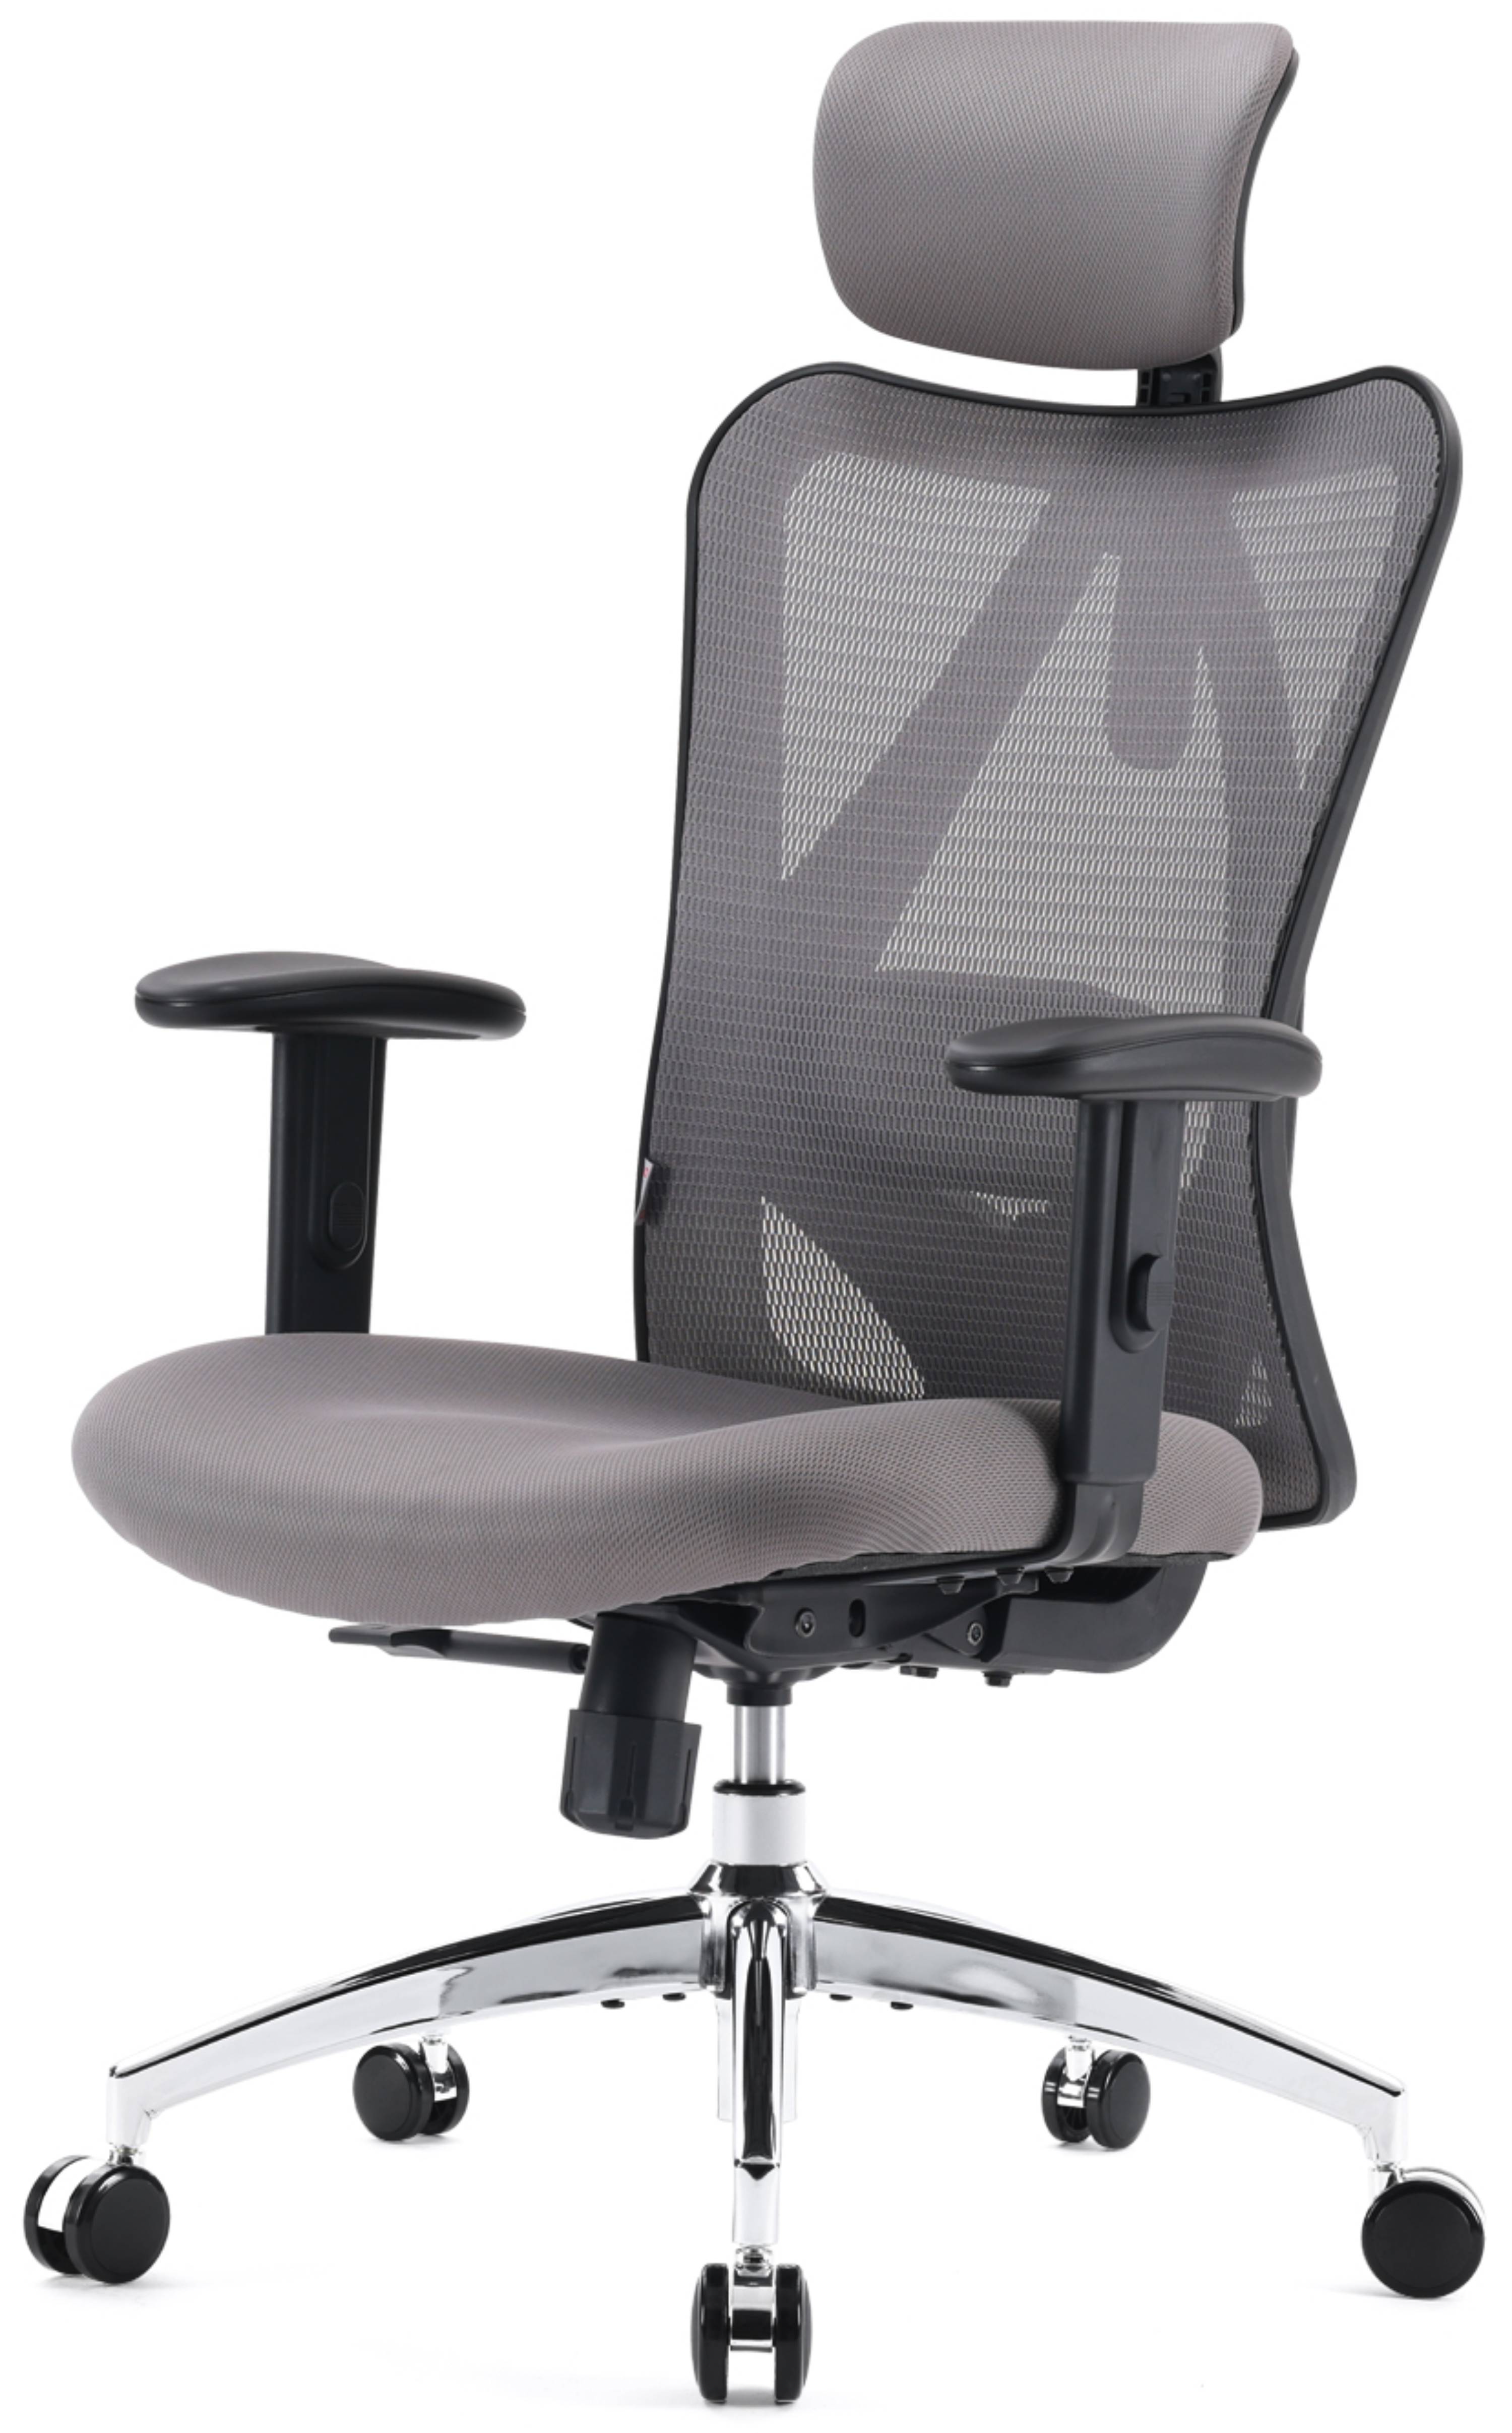 SIHOO Ergonomic High Back Office Chair, Adjustable Computer Desk Chair with Lumbar Support, 300lb, Gray - image 1 of 13